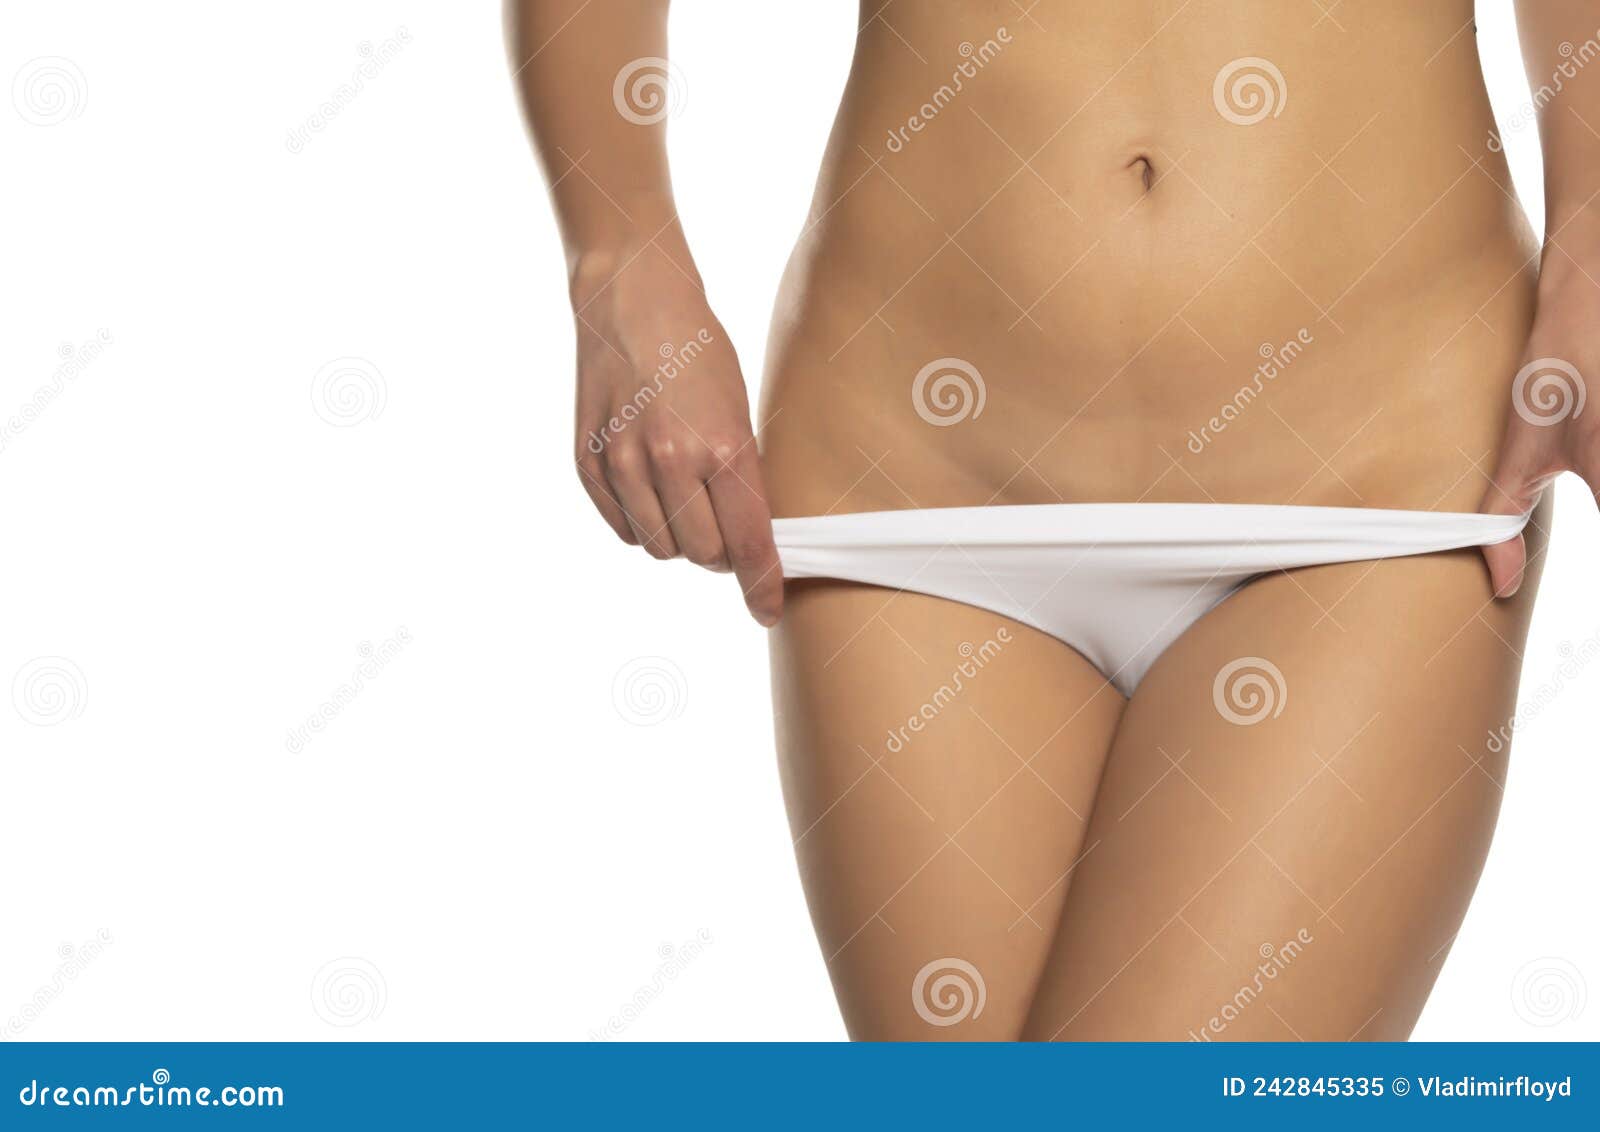 https://thumbs.dreamstime.com/z/young-woman-showing-her-hairless-pubic-area-under-her-panties-young-woman-showing-her-hairless-pubic-area-under-her-panties-242845335.jpg